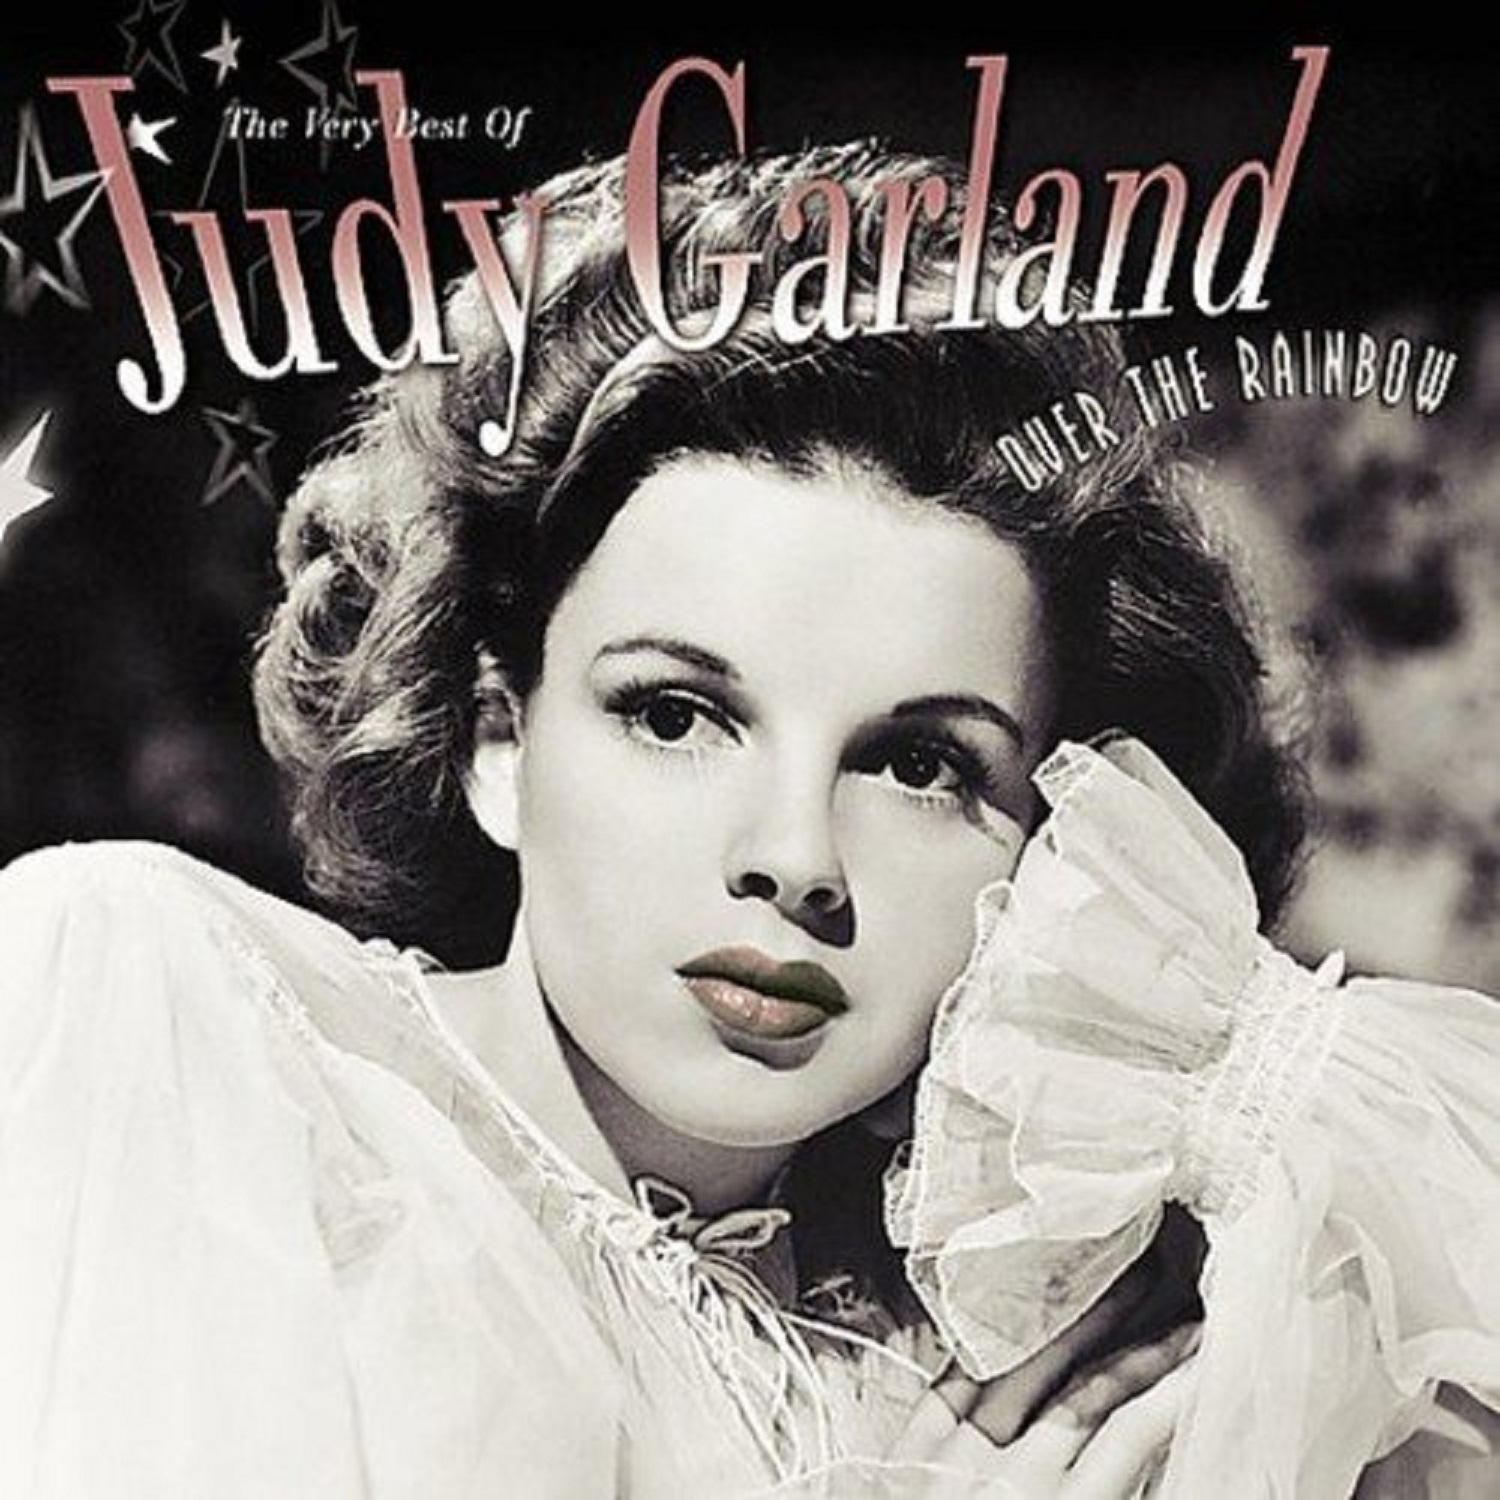 A Tribute to Judy Garland: The Iconic Star Who Dazzled the World